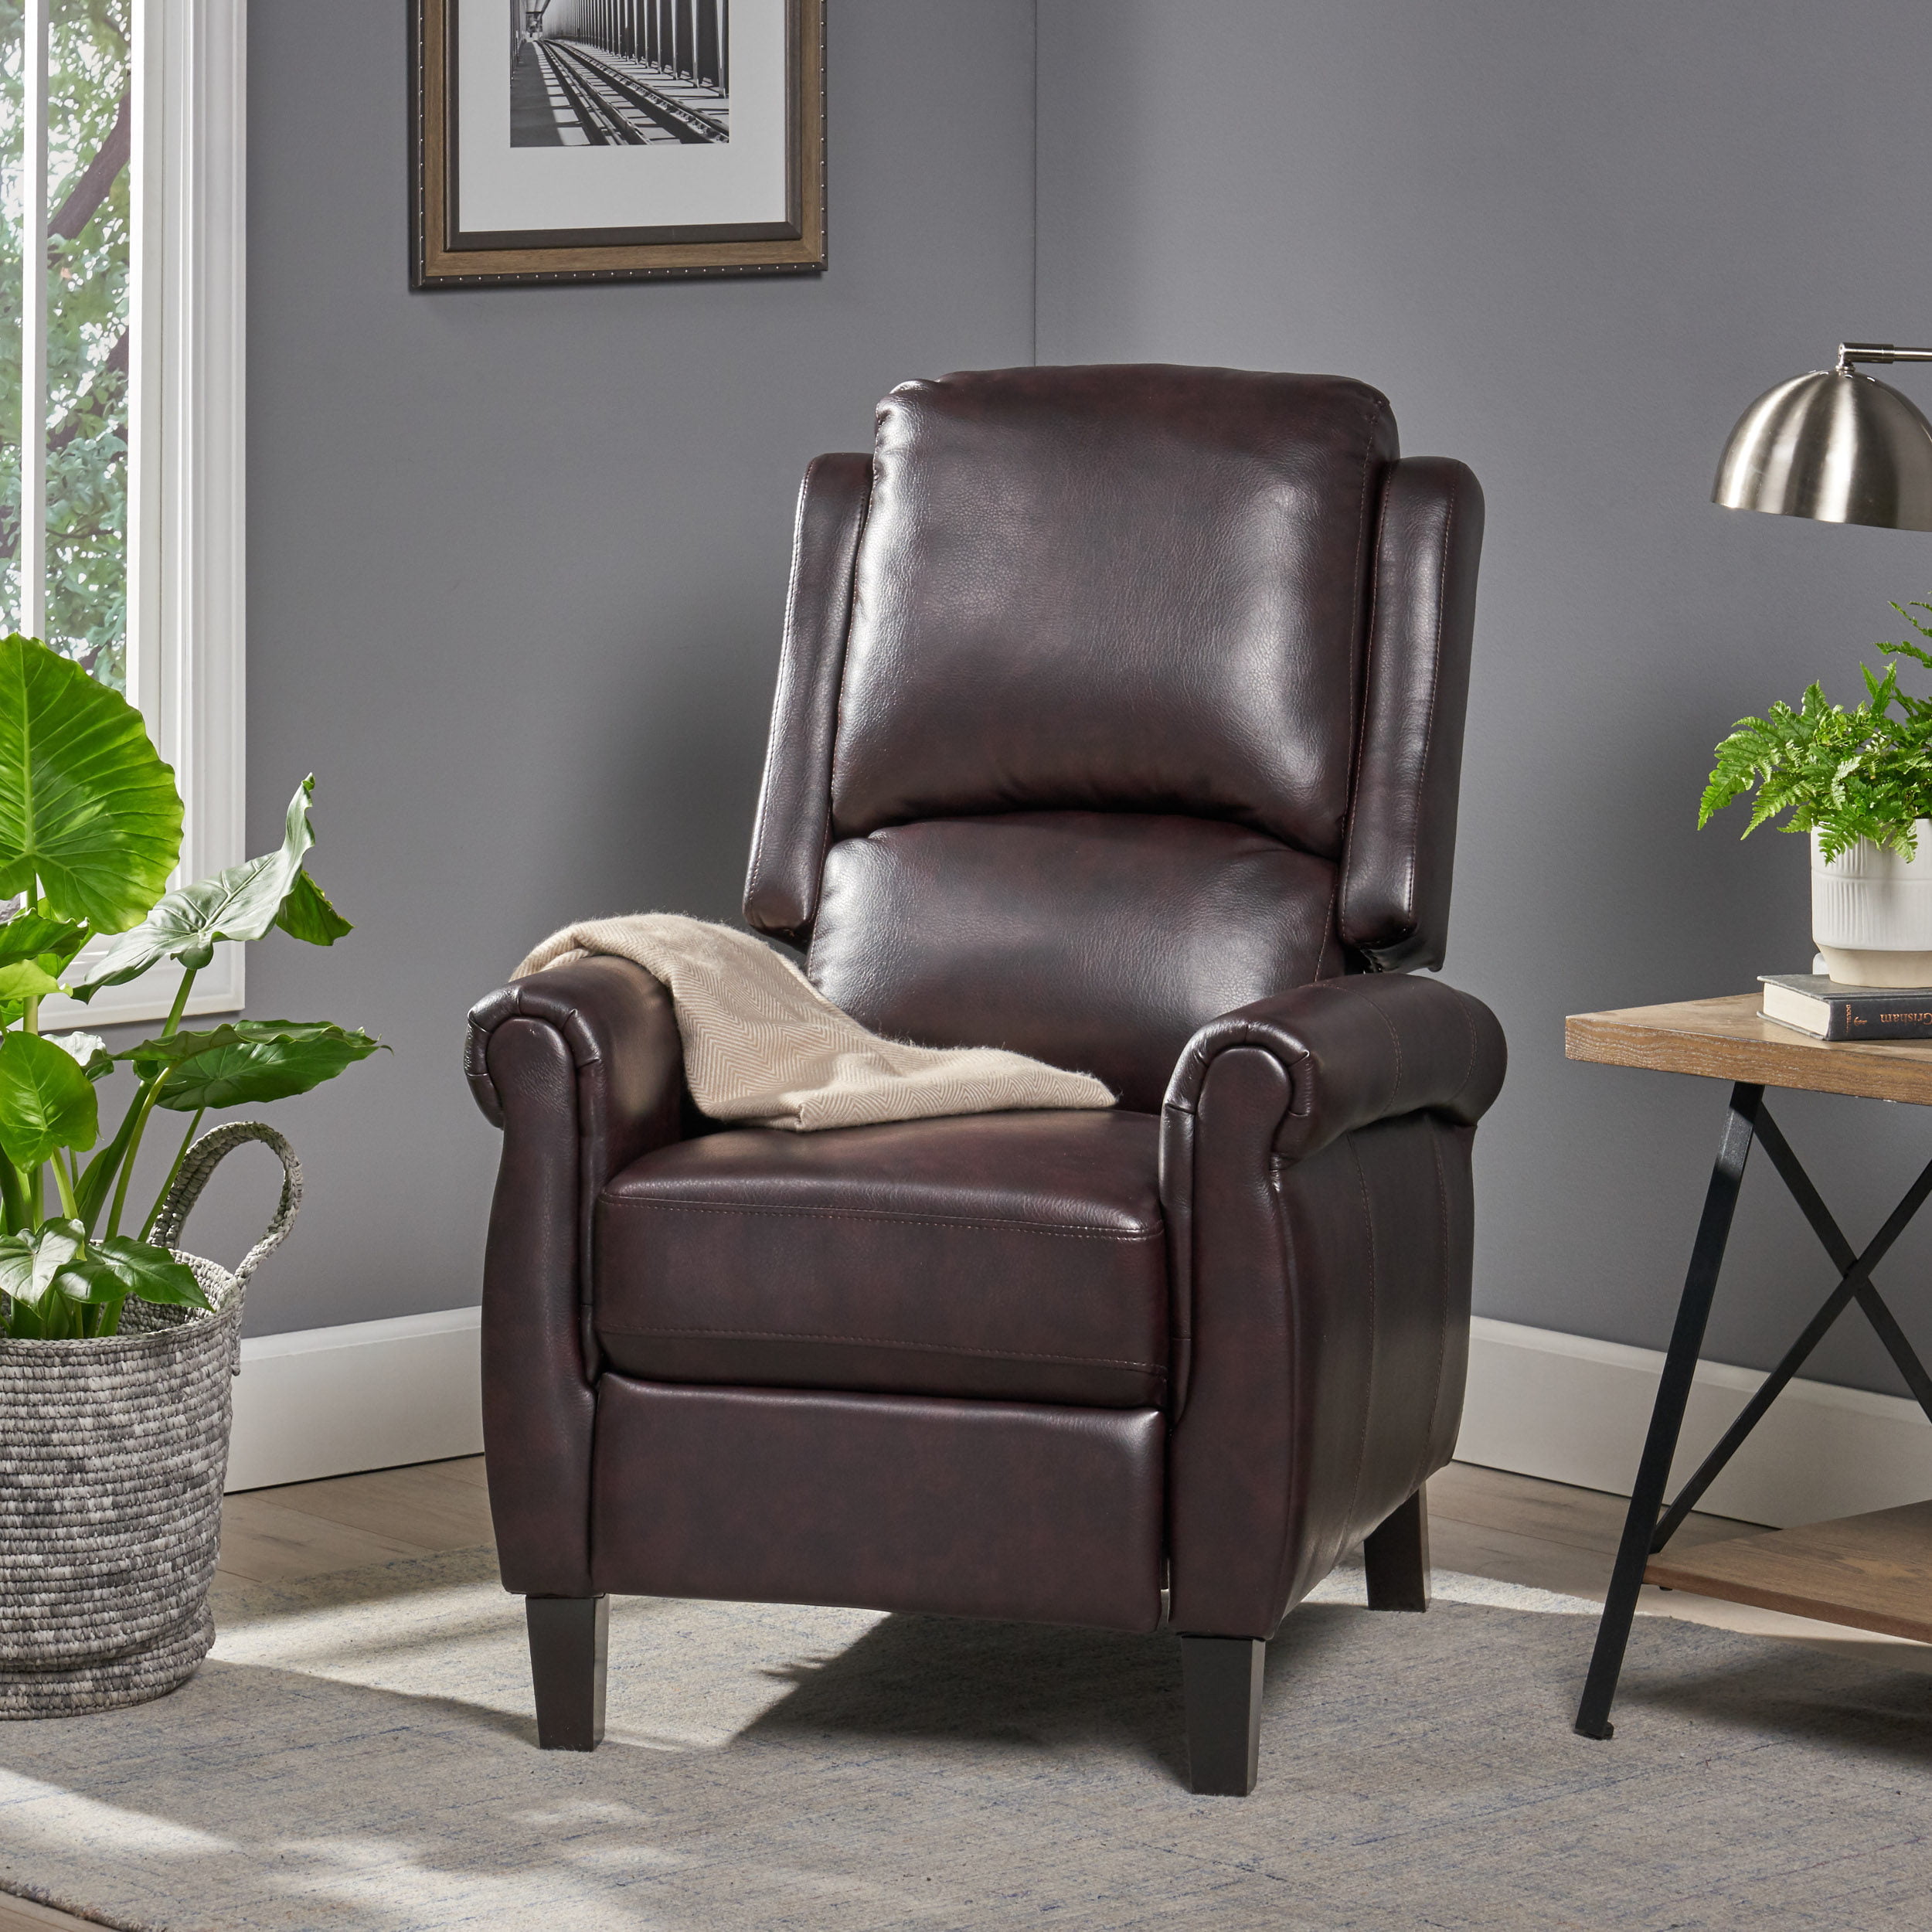 Gdf Studio Memphis Brown Leather, Brown Leather Recliners